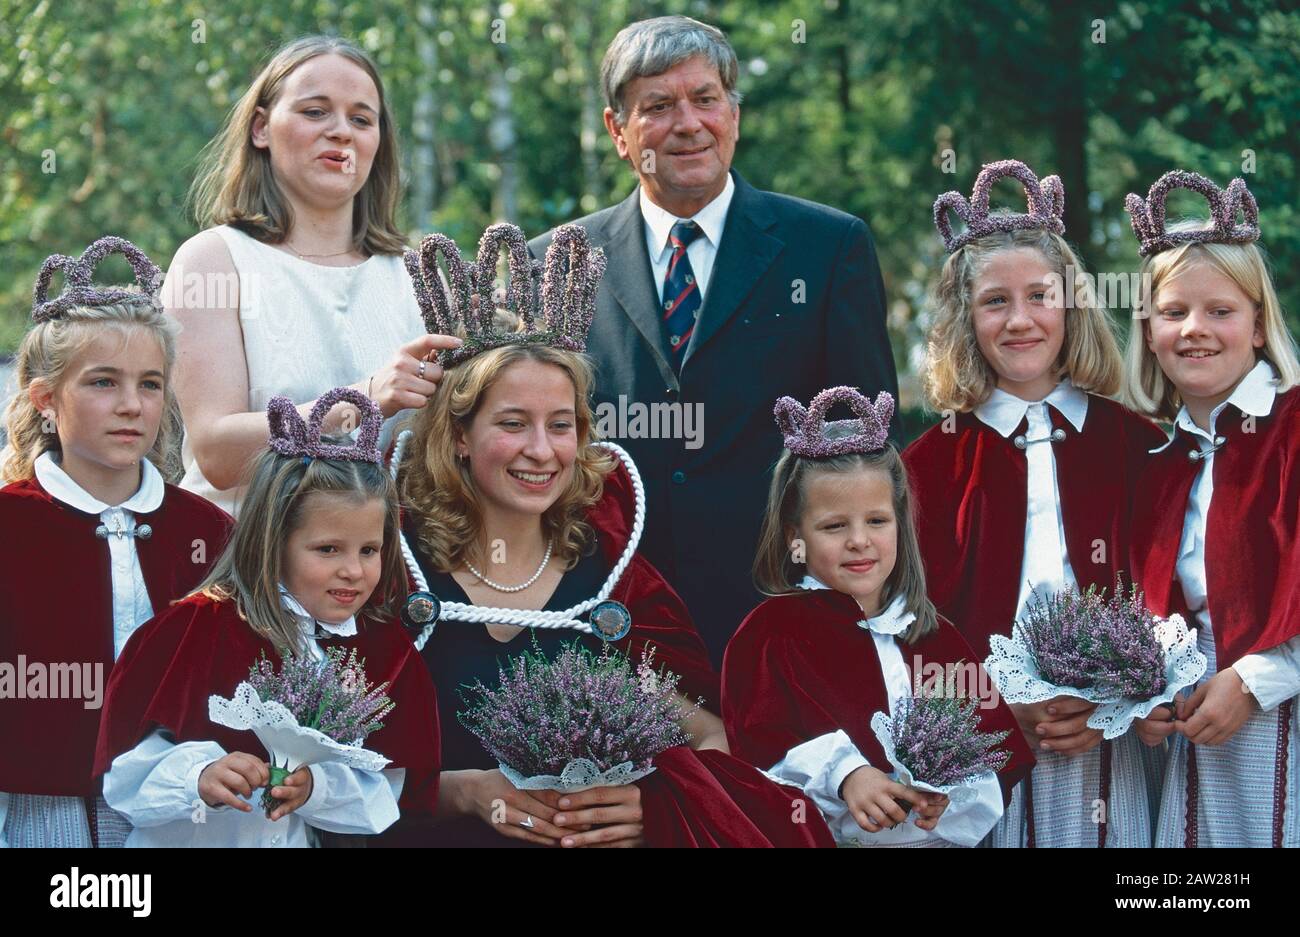 Heather Queen Annelie Richter (Witte) with Landrat Fietz and other people at Heather blooming festival in Amelinghausen 2001, Lower Saxony, Germany Stock Photo